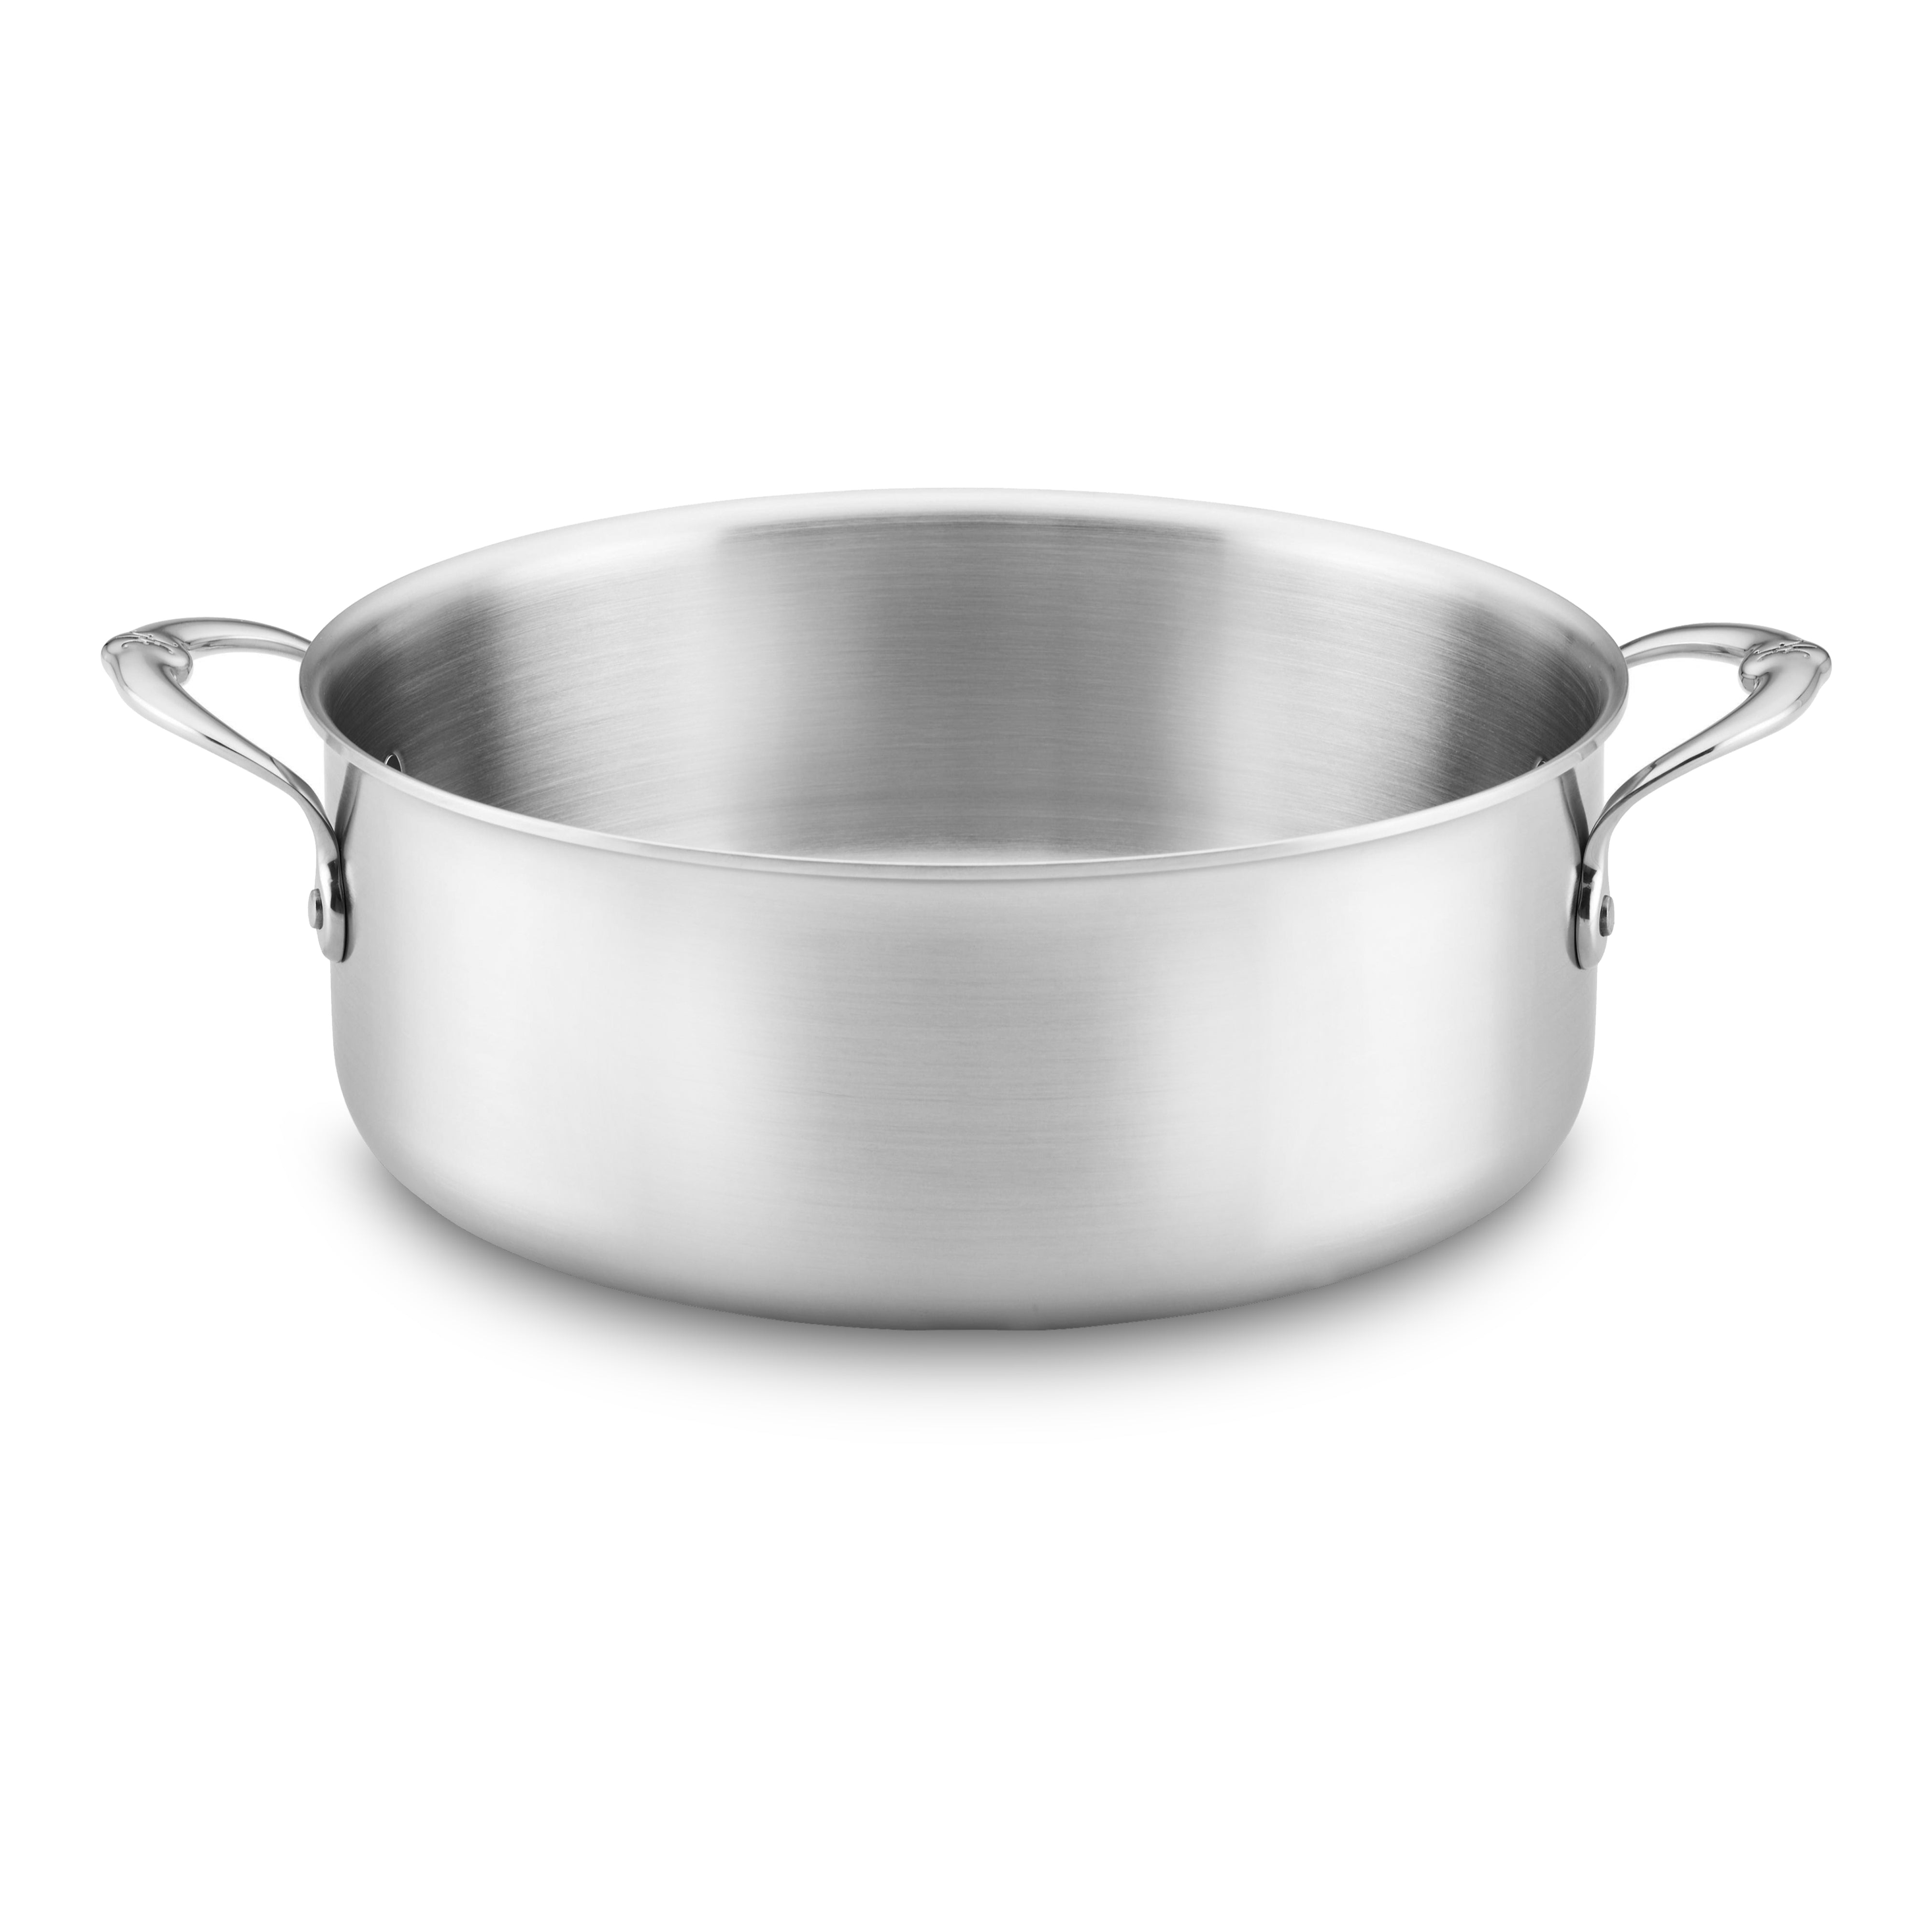 Made In Cookware - 10 Quart Stainless Steel Rondeau Pot w/ Lid